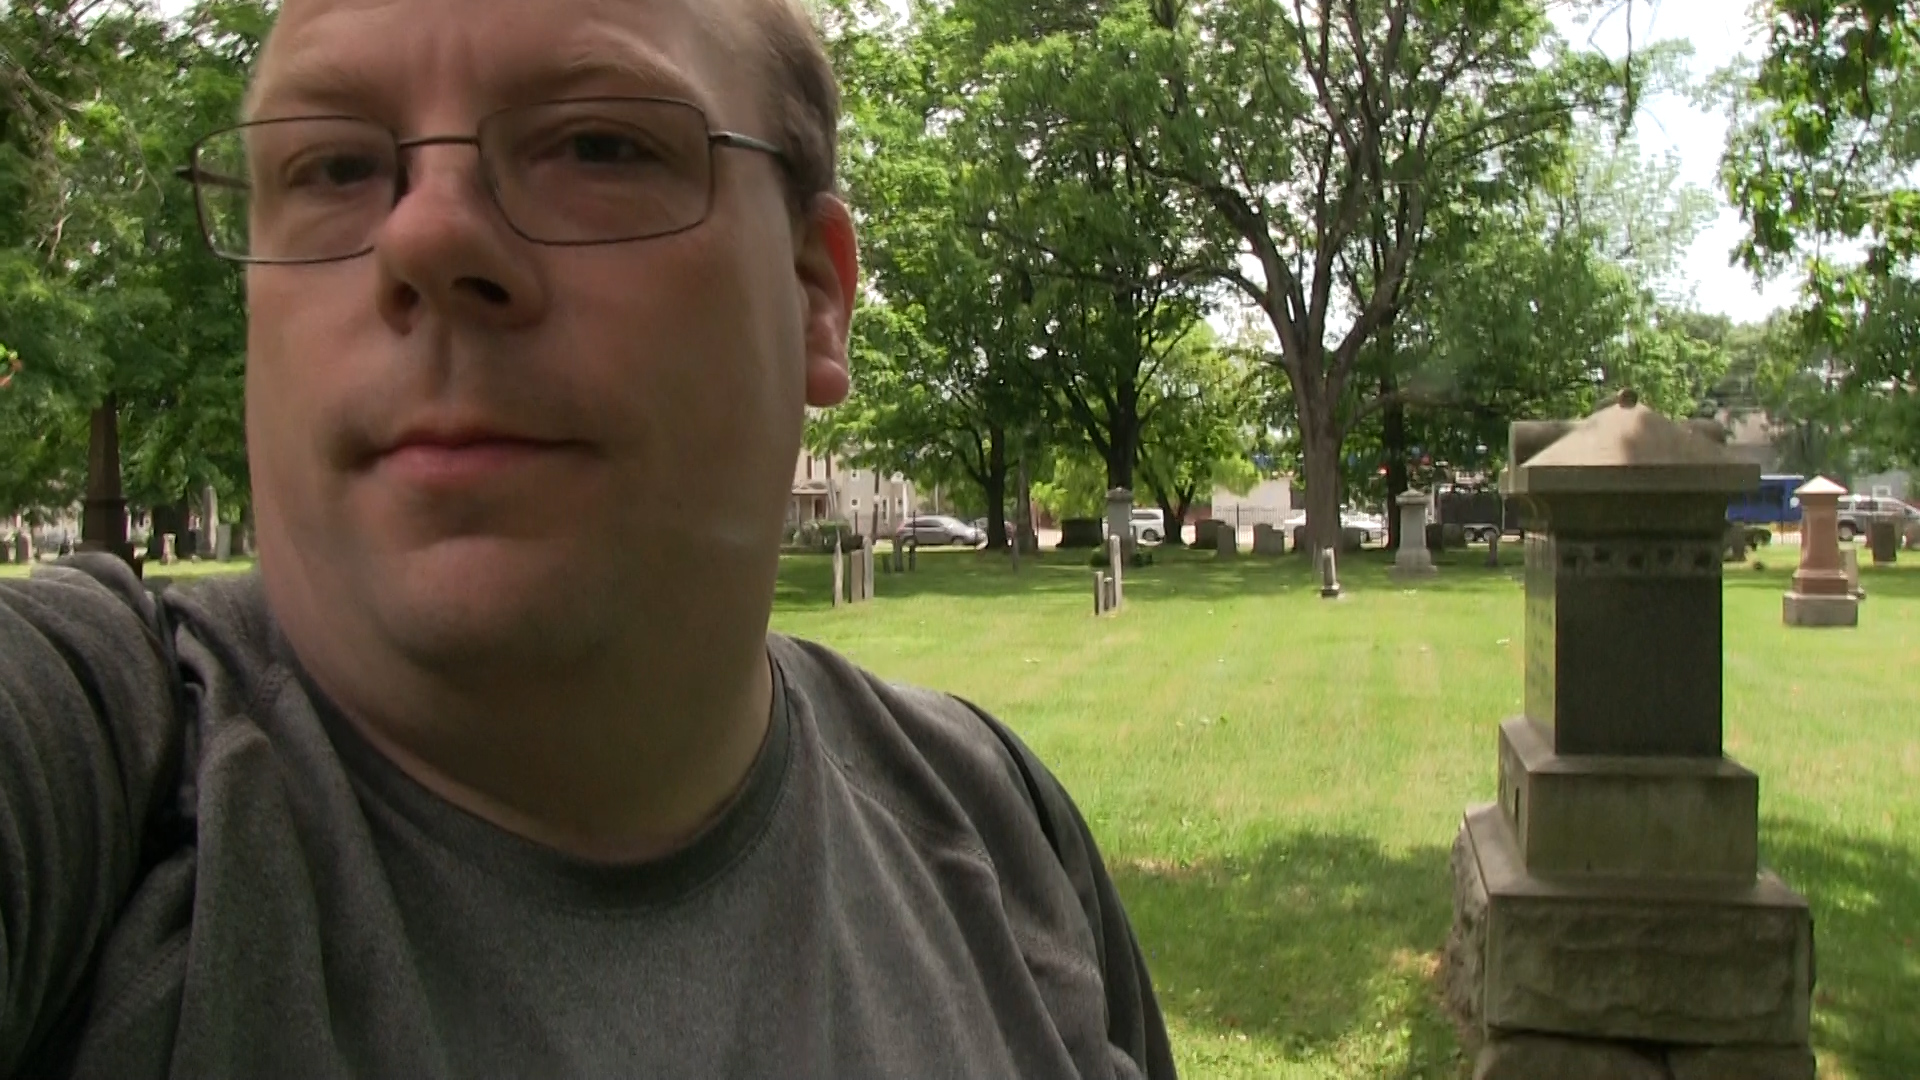 A screen grab from today's adventure at the cemetery.